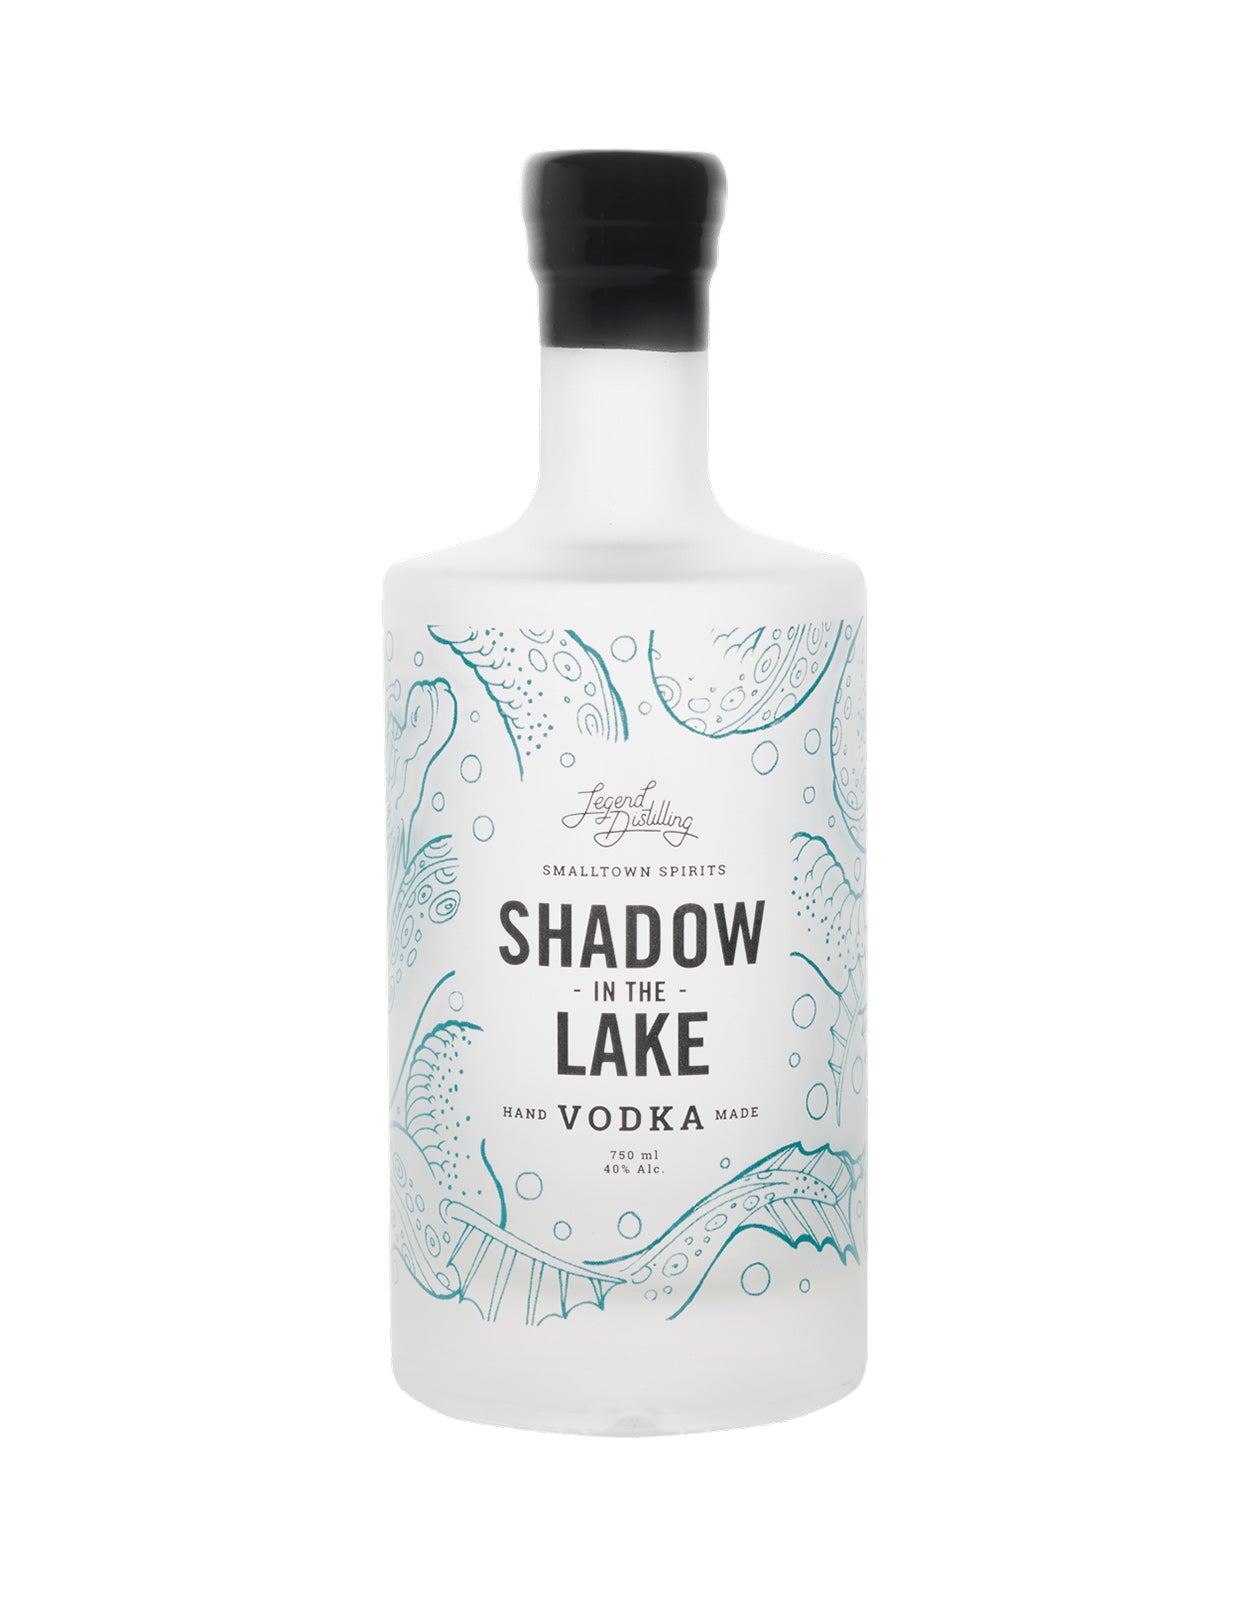 Legend Shadow in the Lake Vodka